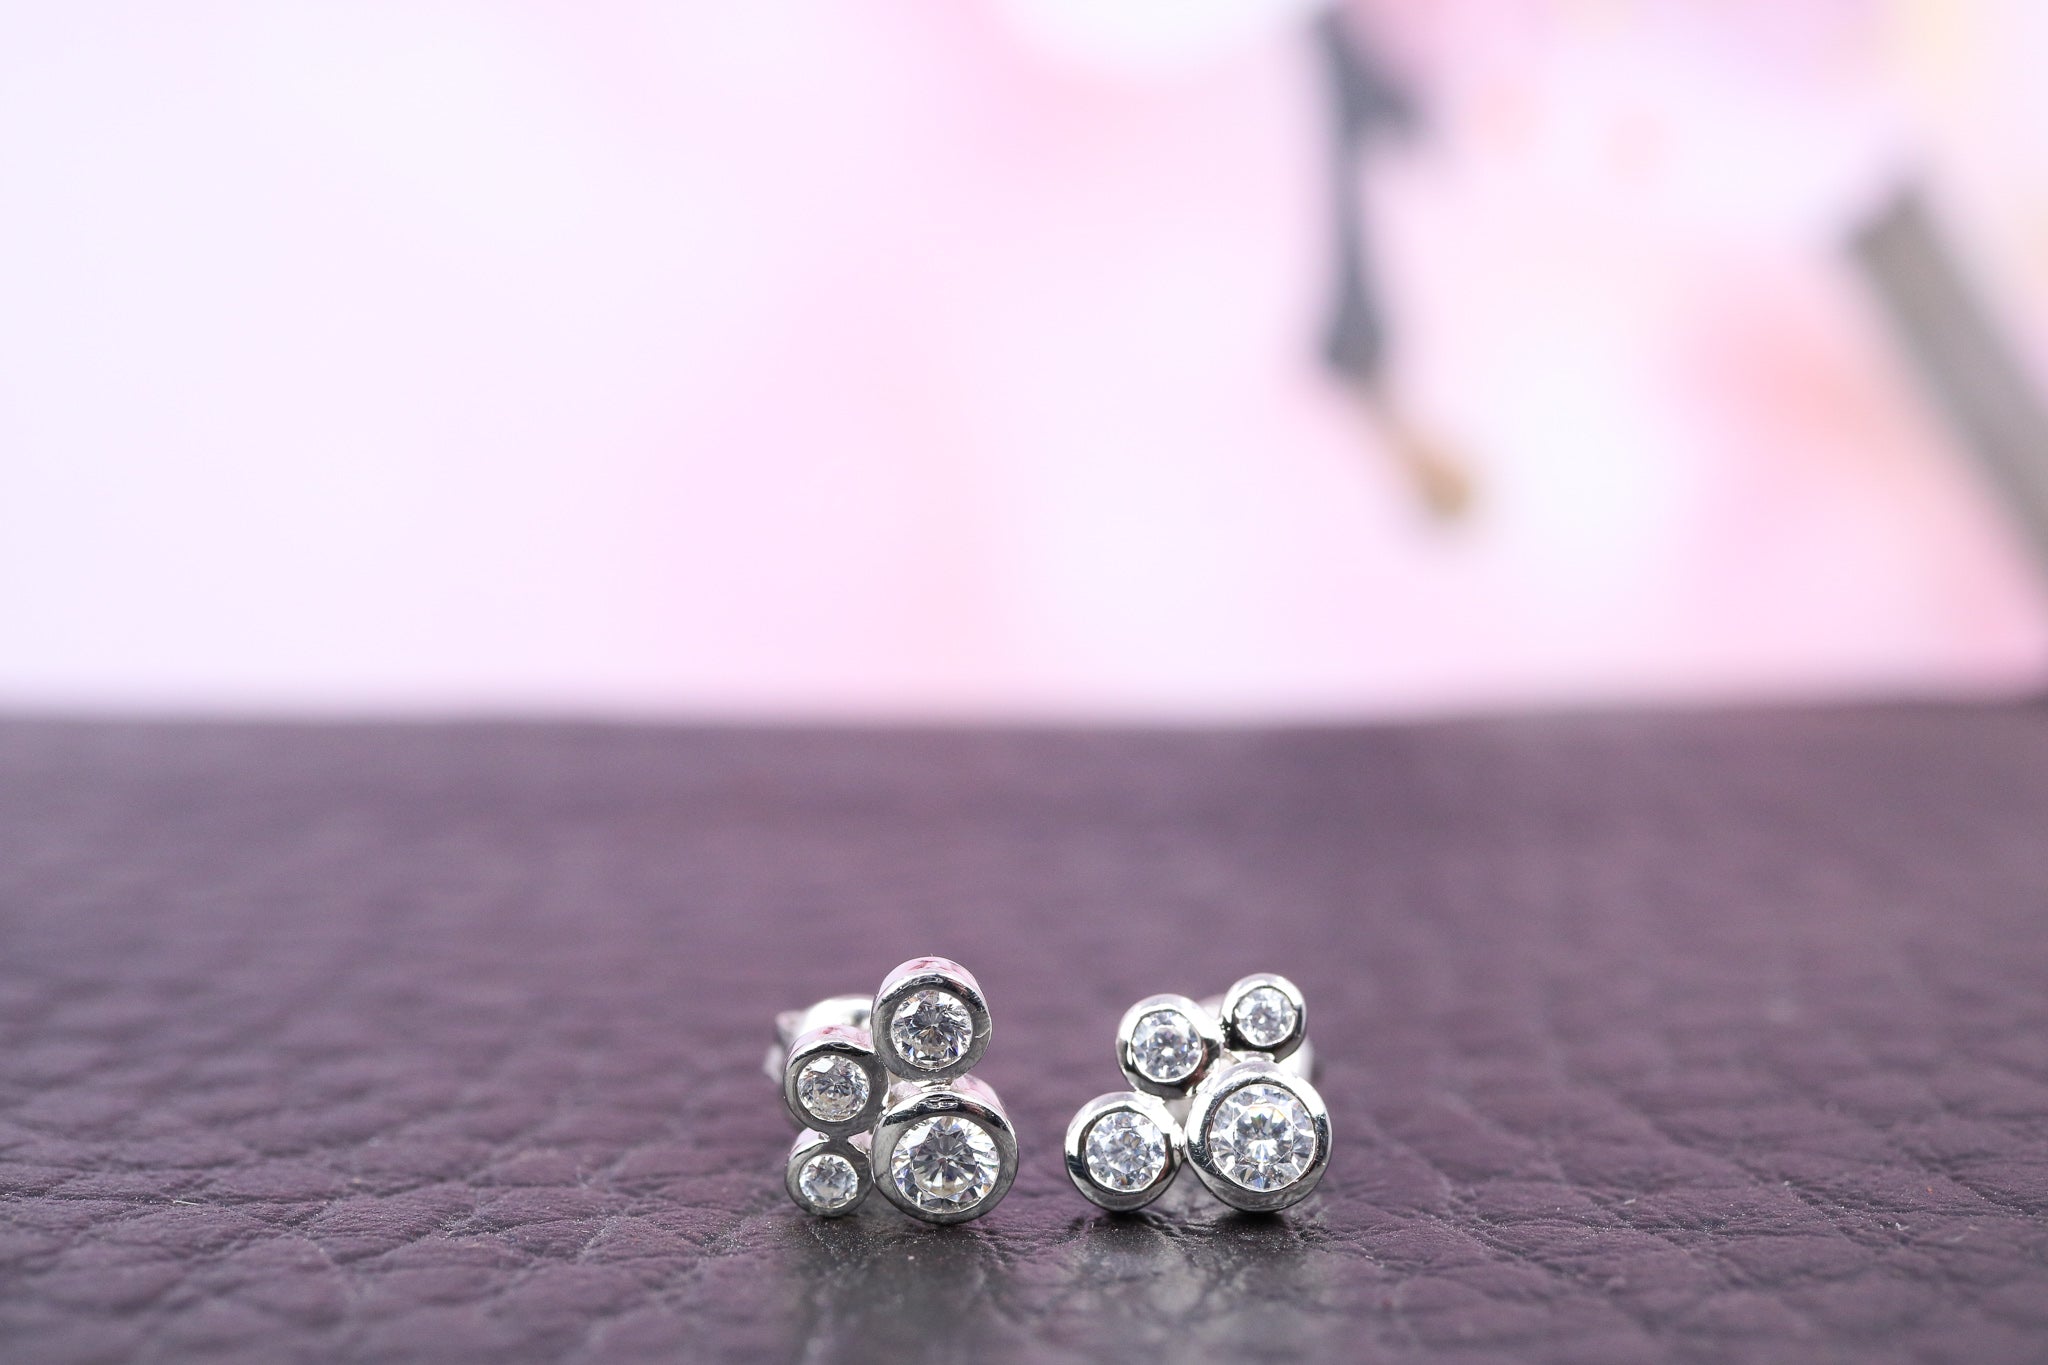 Jools Sterling Silver Earrings - JL1019 - Hallmark Jewellers Formby & The Jewellers Bench Widnes